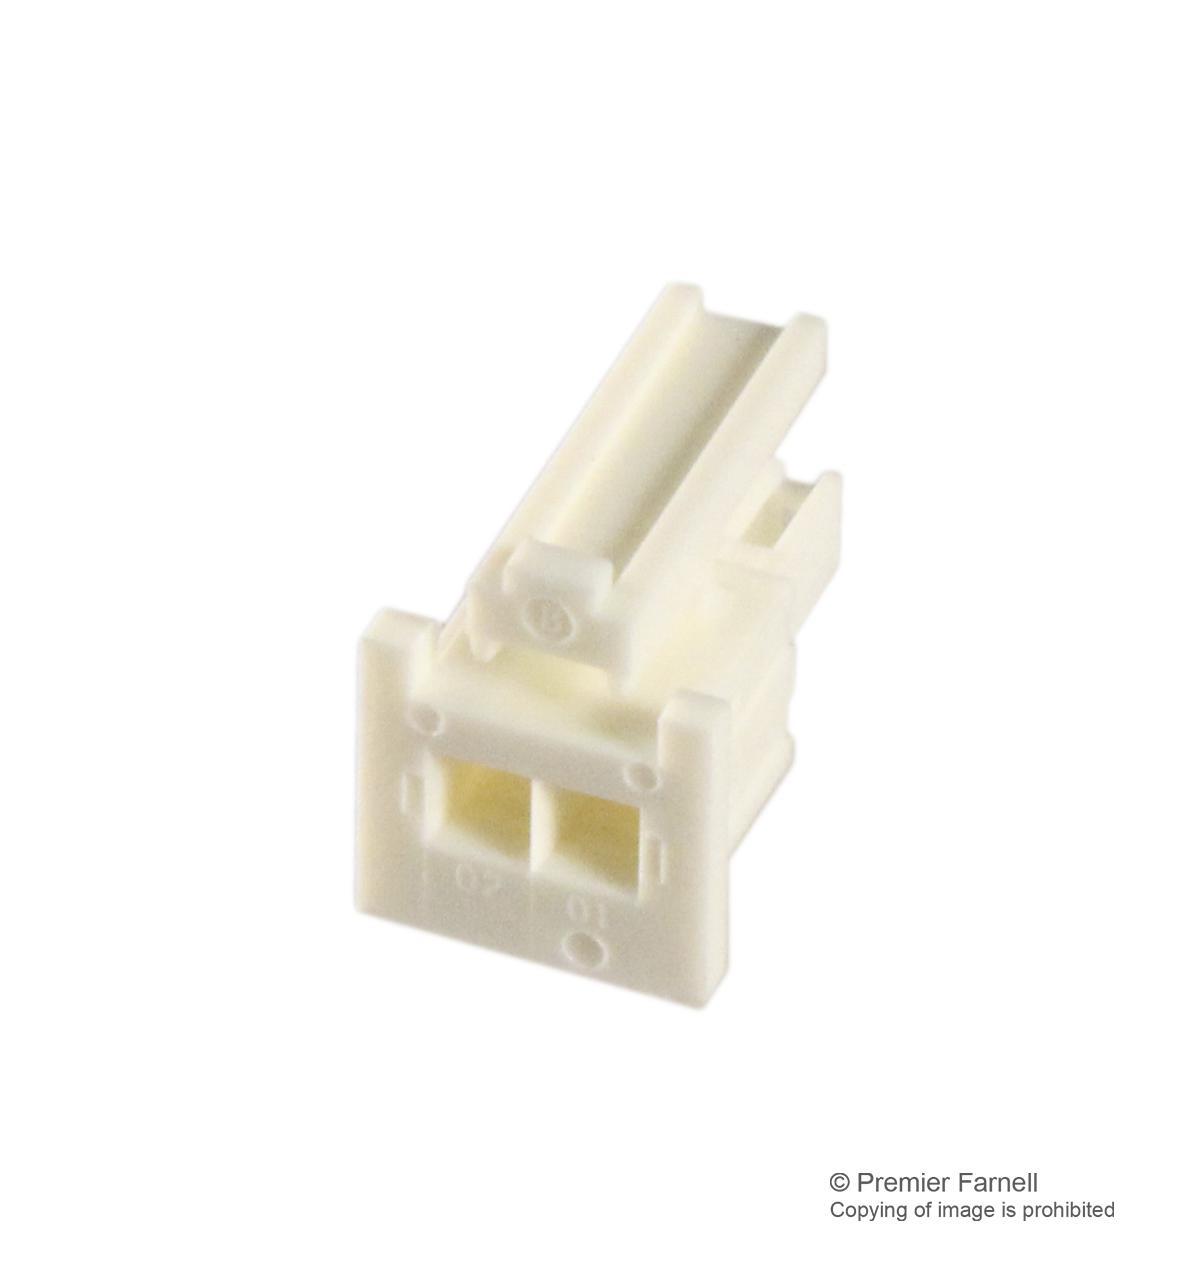 IPD1-05-S-K . CONNECTOR HOUSING, RCPT, 5POS SAMTEC